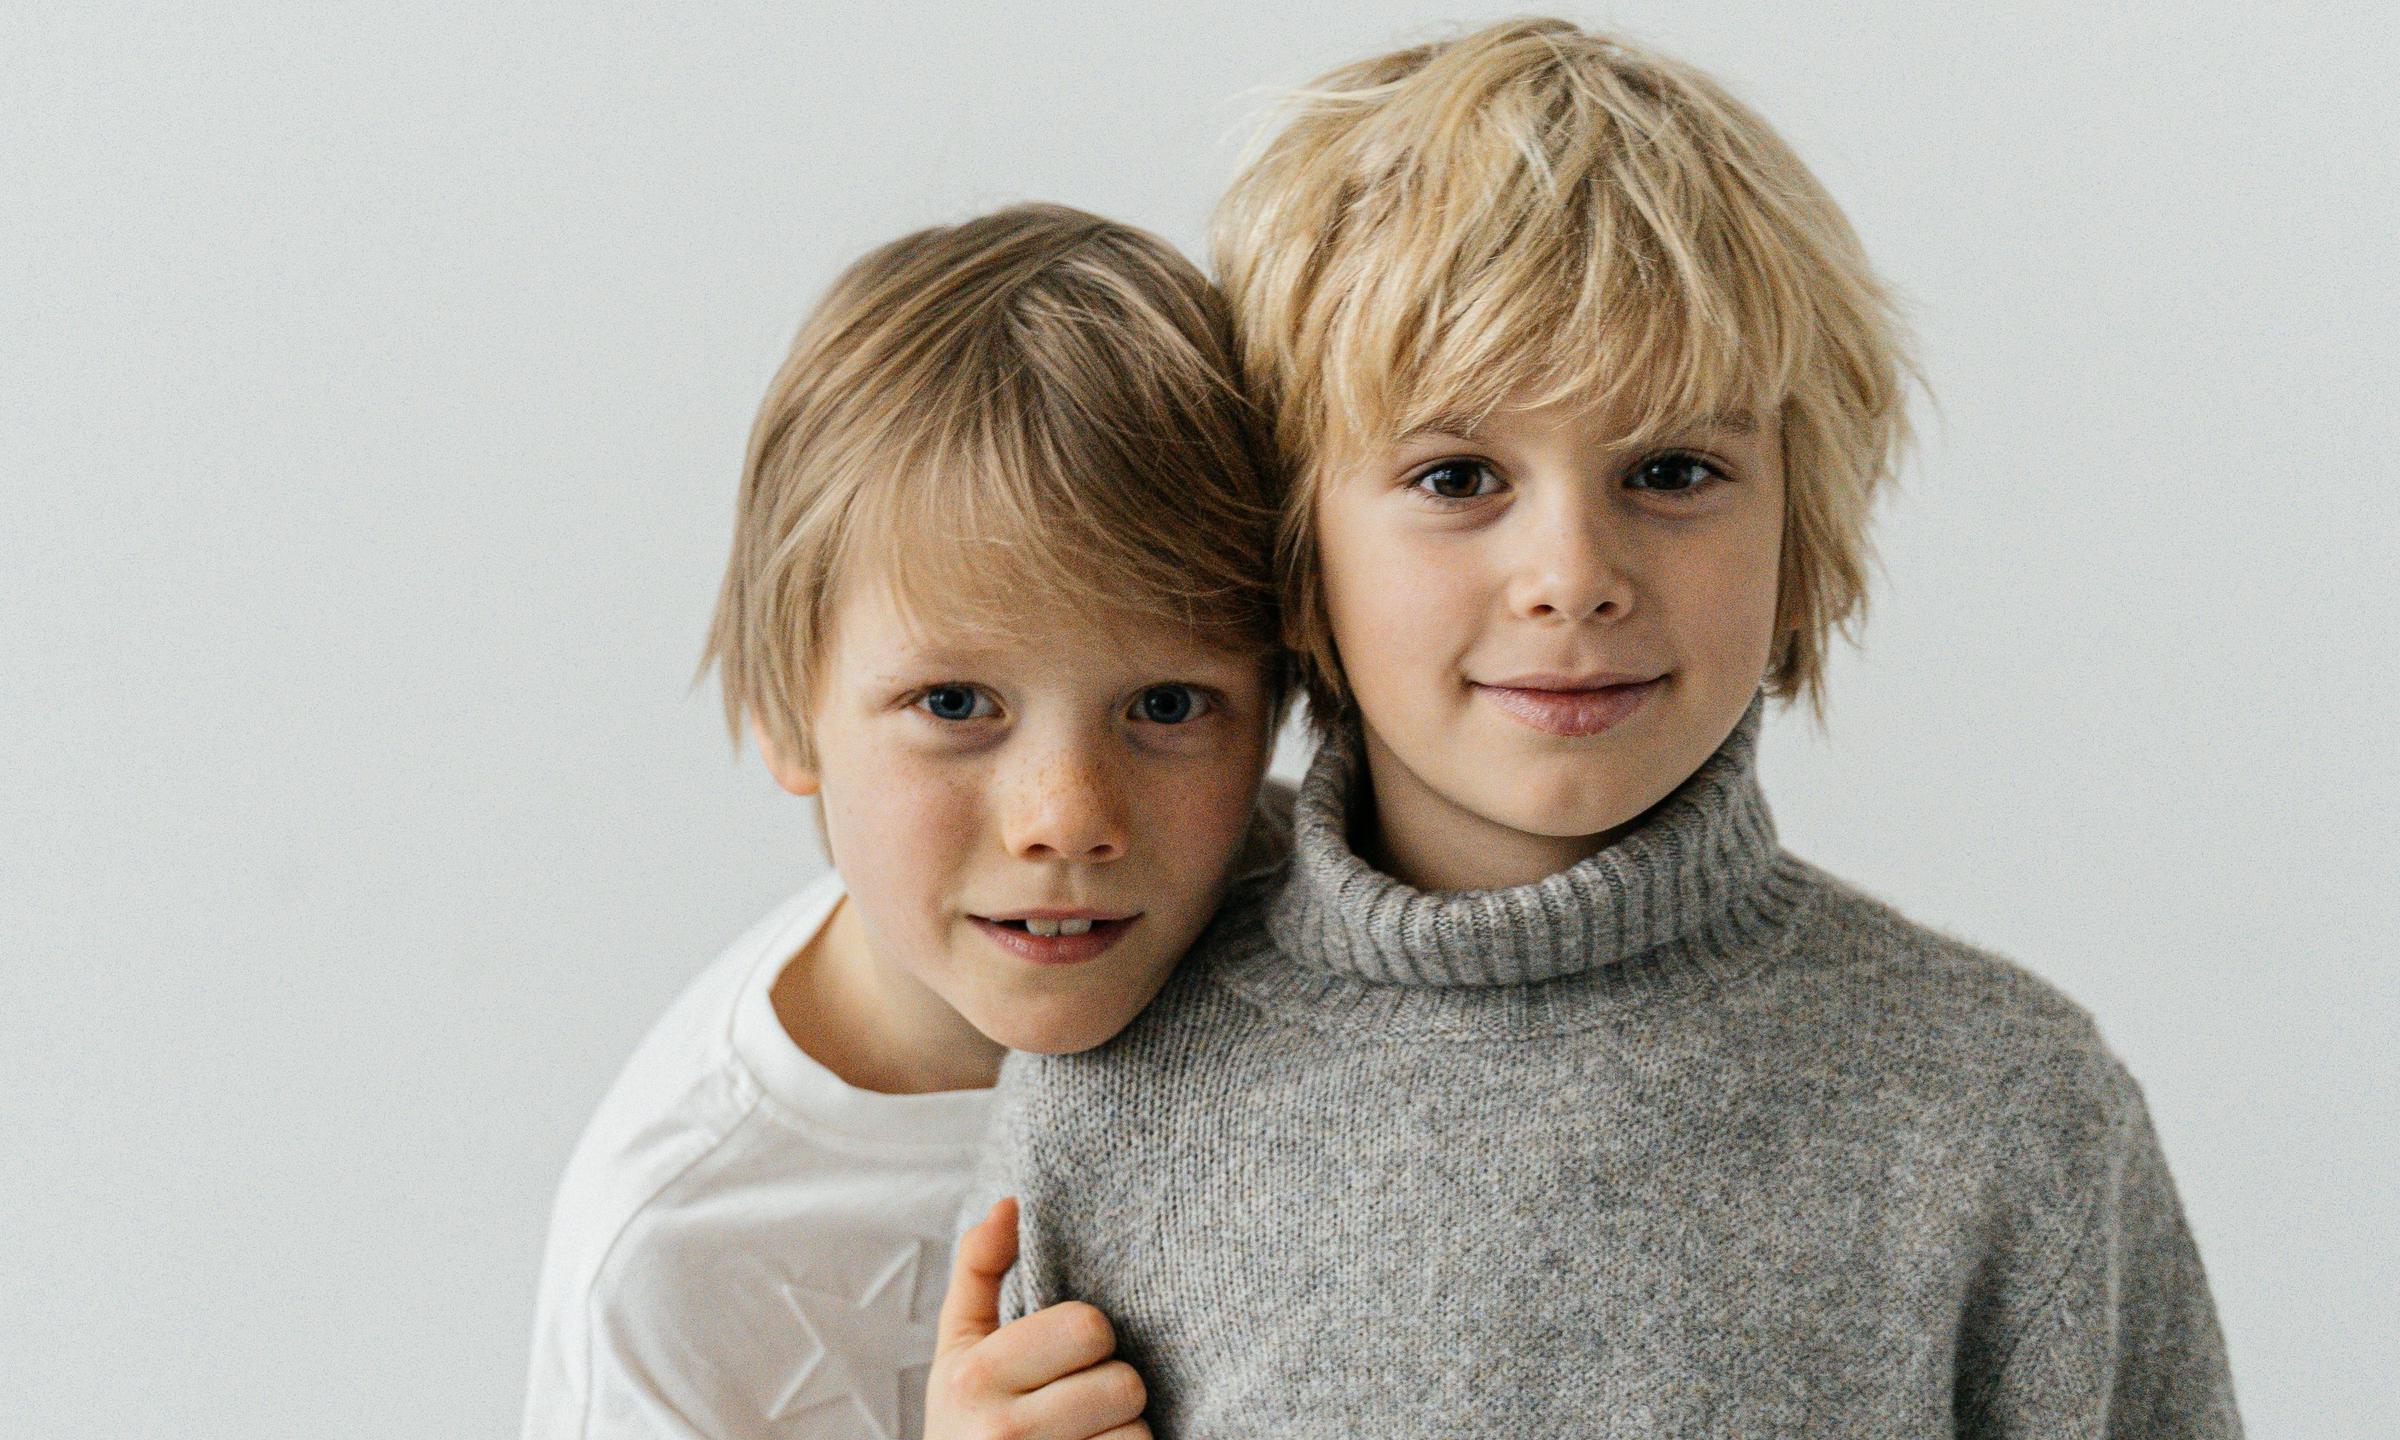 A pair of blond boys | Source: Pexels